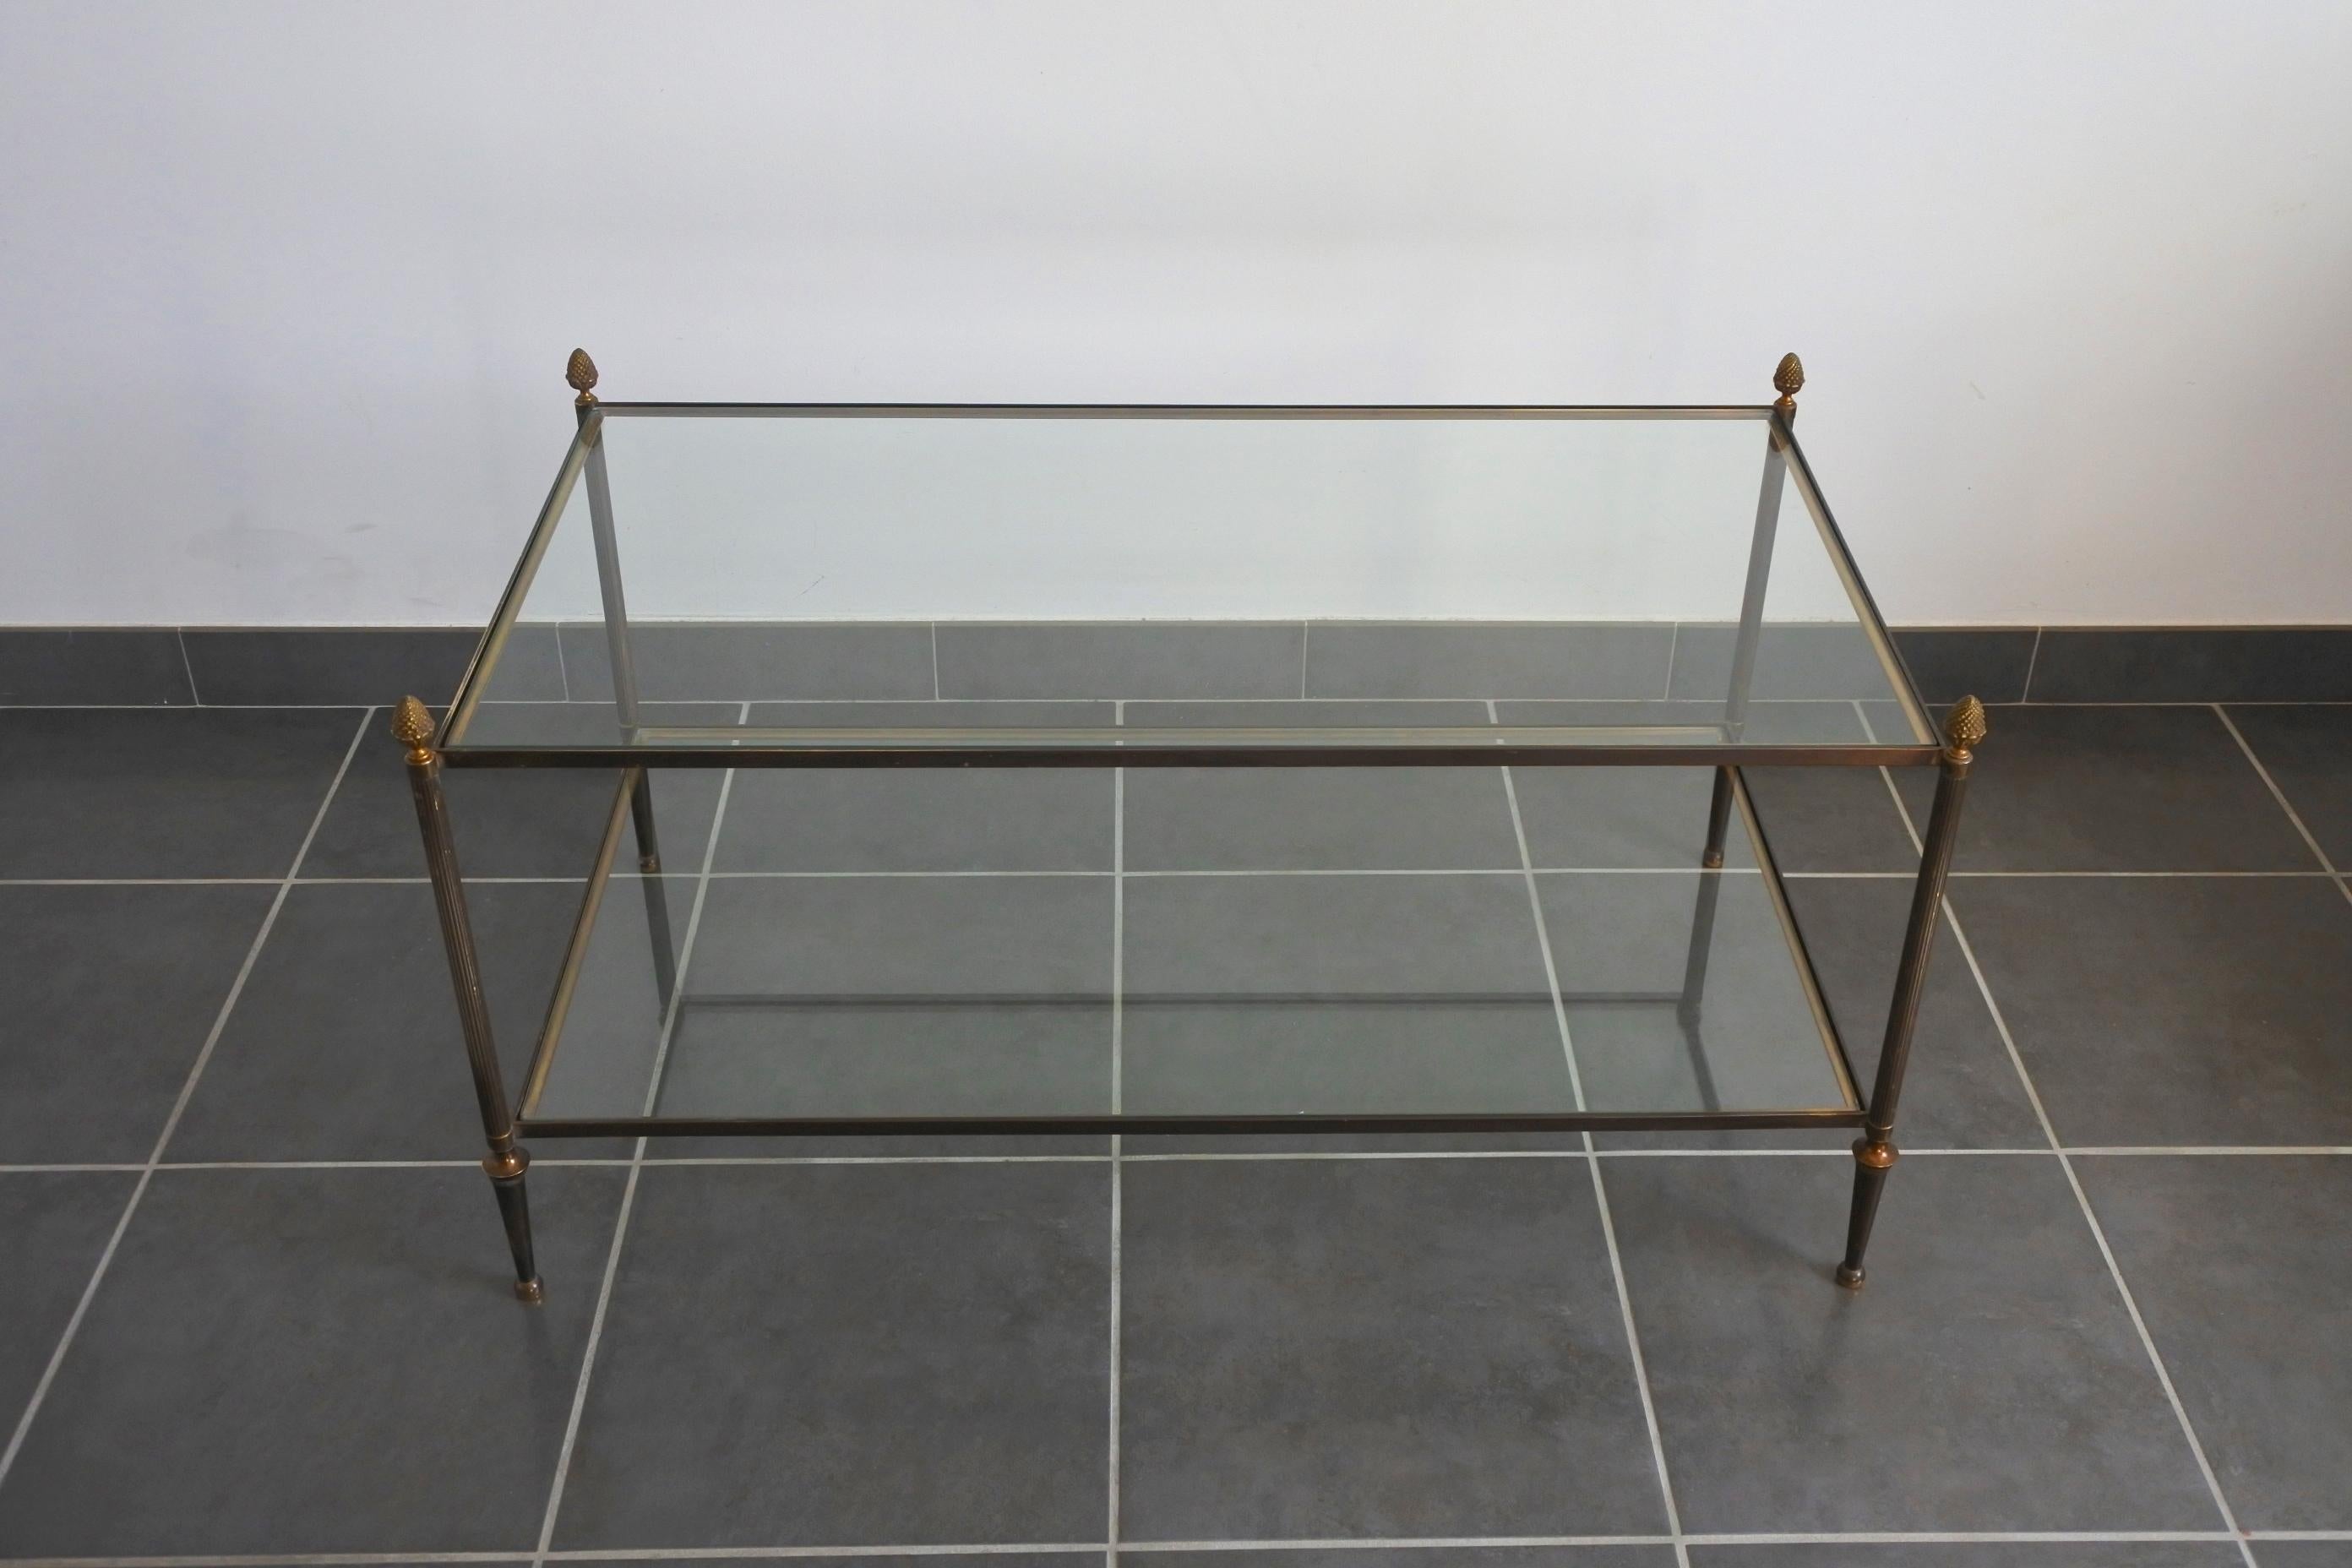 Neoclassical two-tiered coffee table
Solid brass and glass.
Made in France.
Original and beautifully aged patina to the brass.